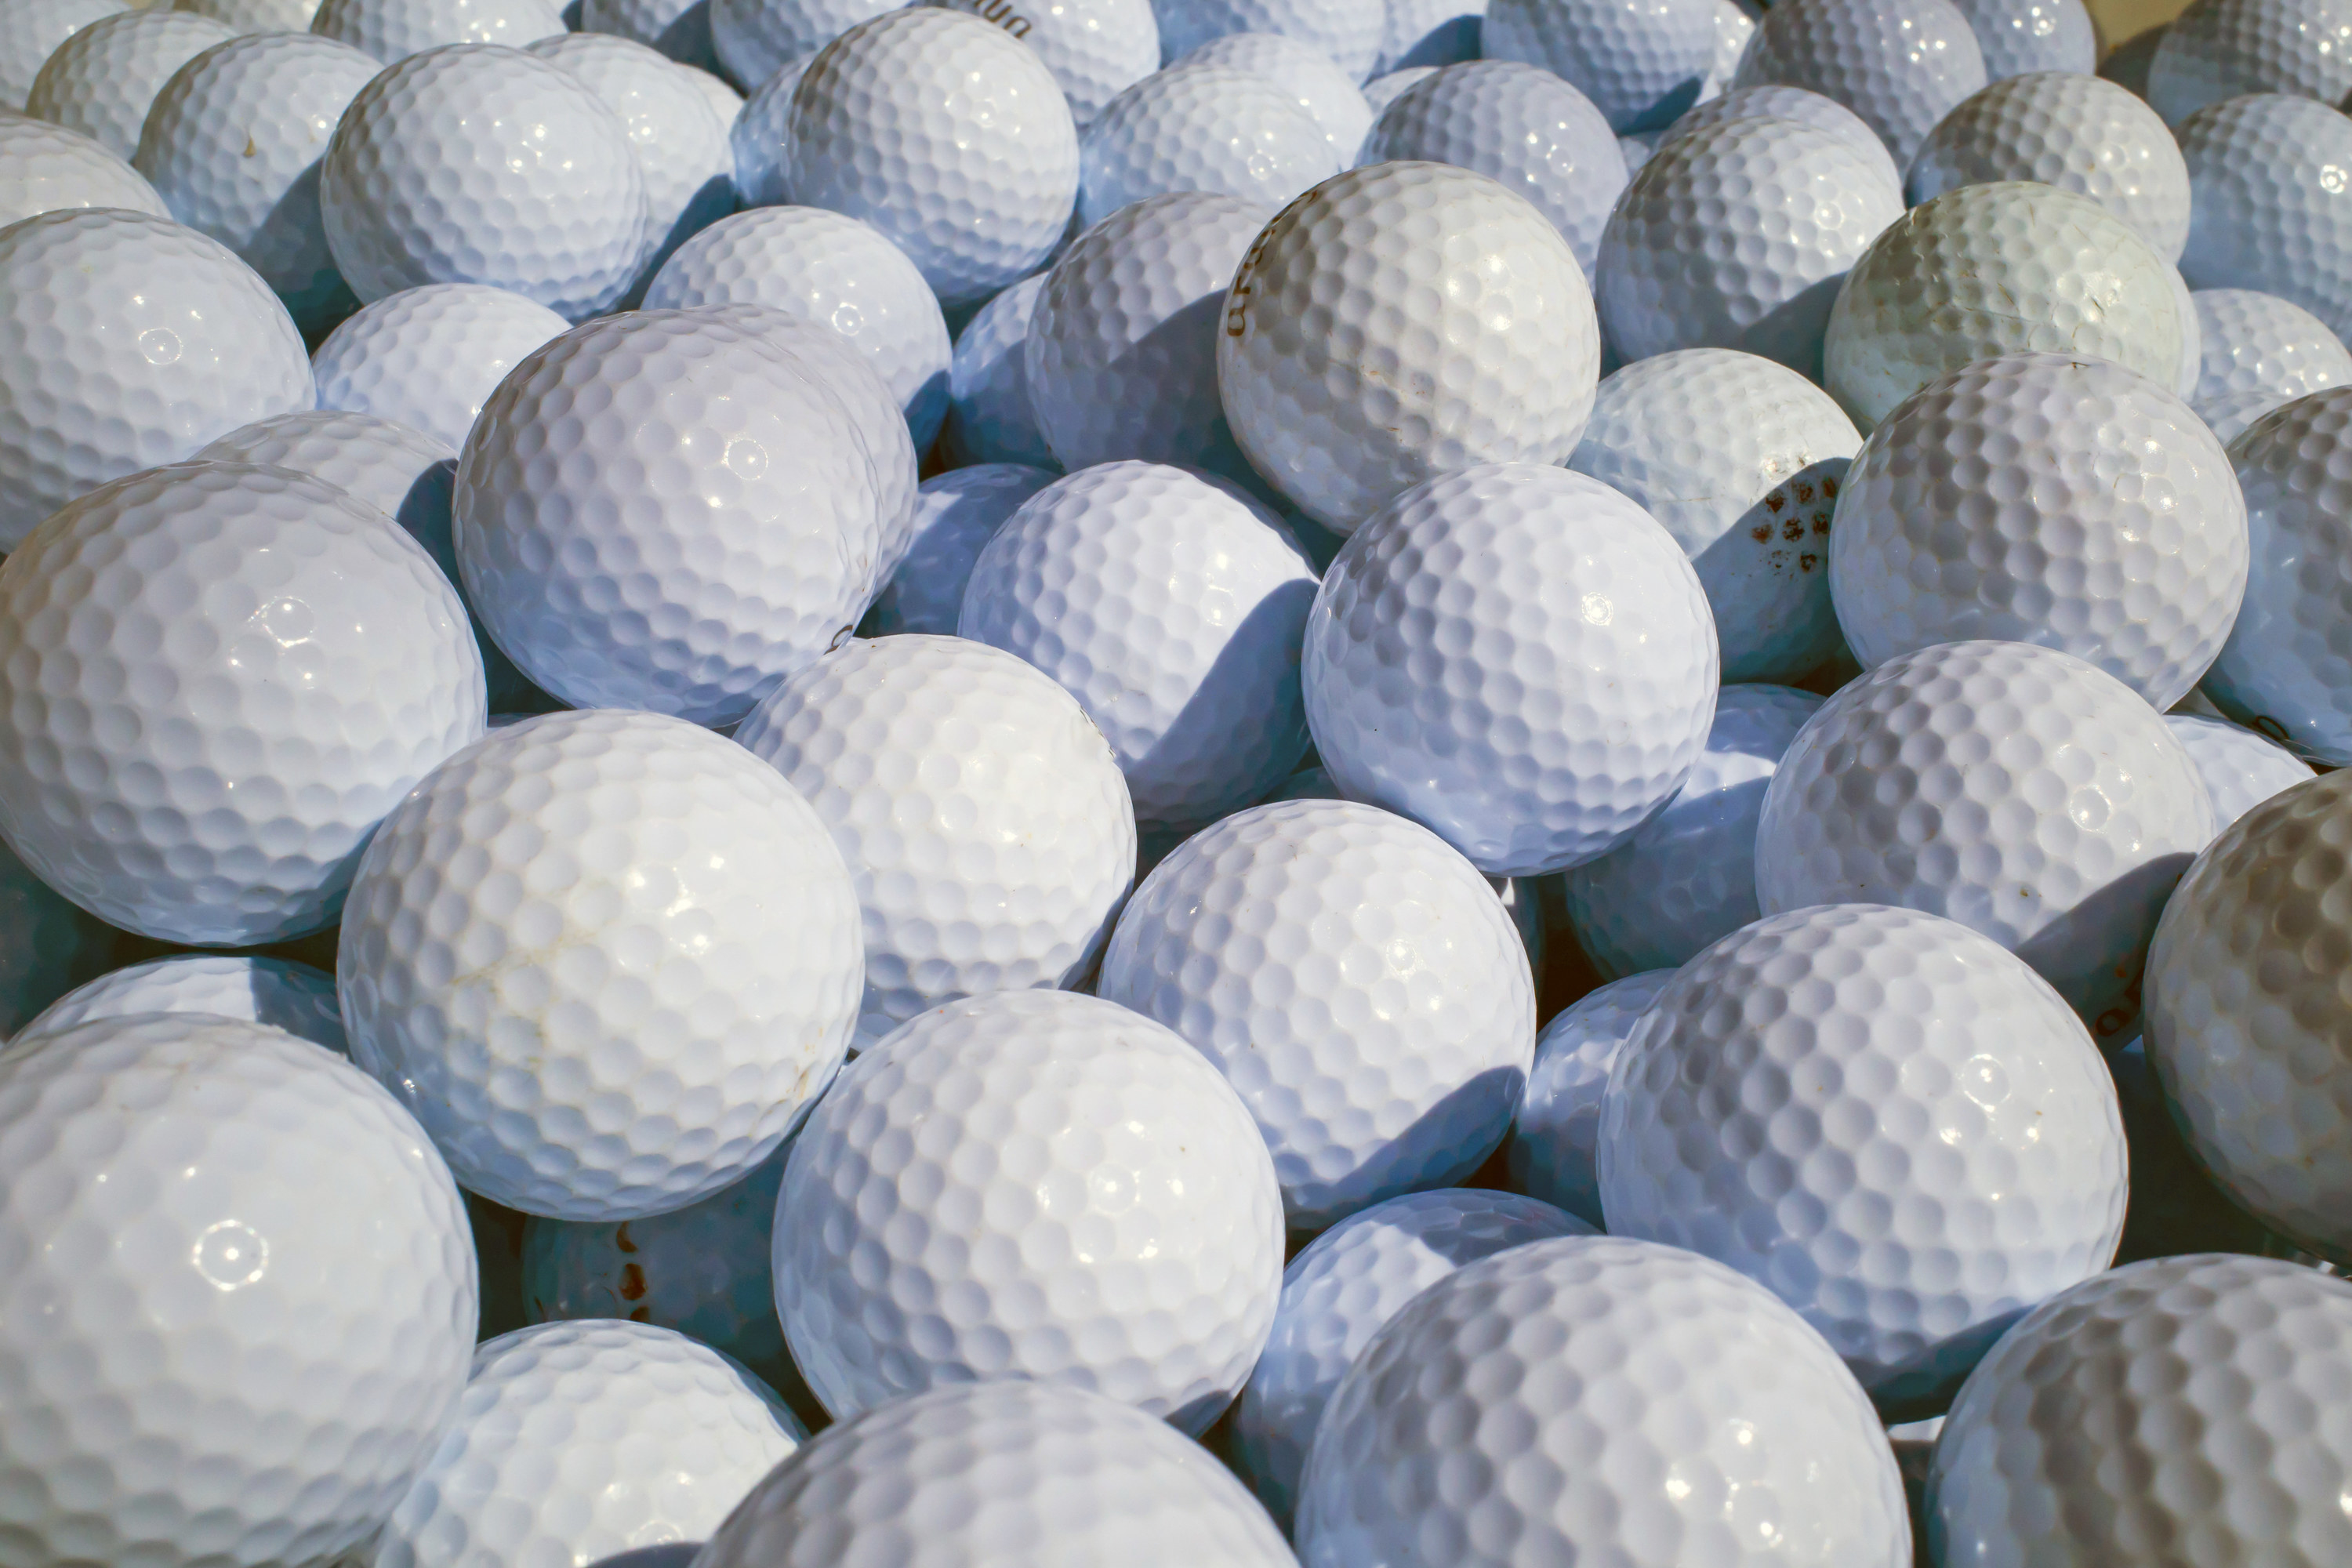 a pile of golf balls on top of one another